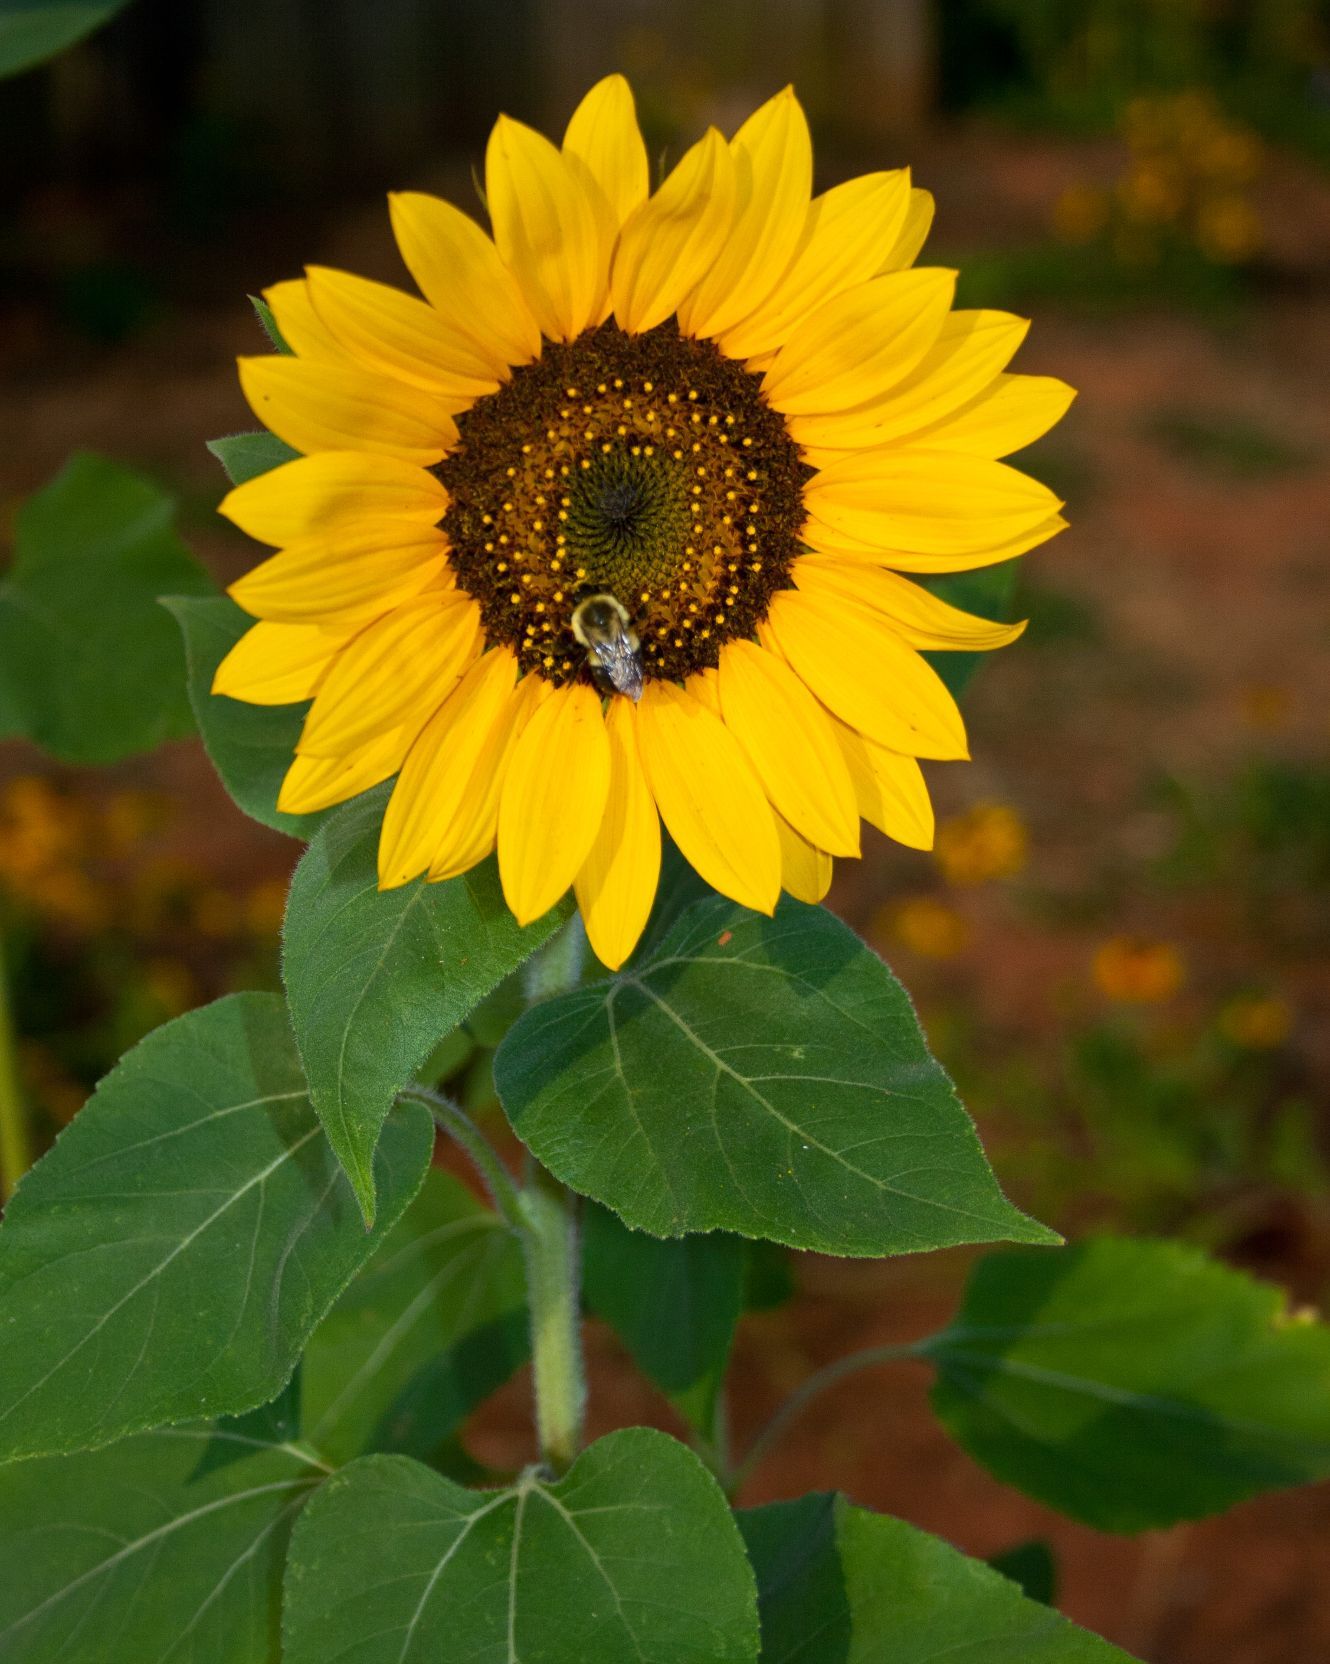 Another Single Sunflower | Flower Pictures | Pinterest | Sunflowers ...